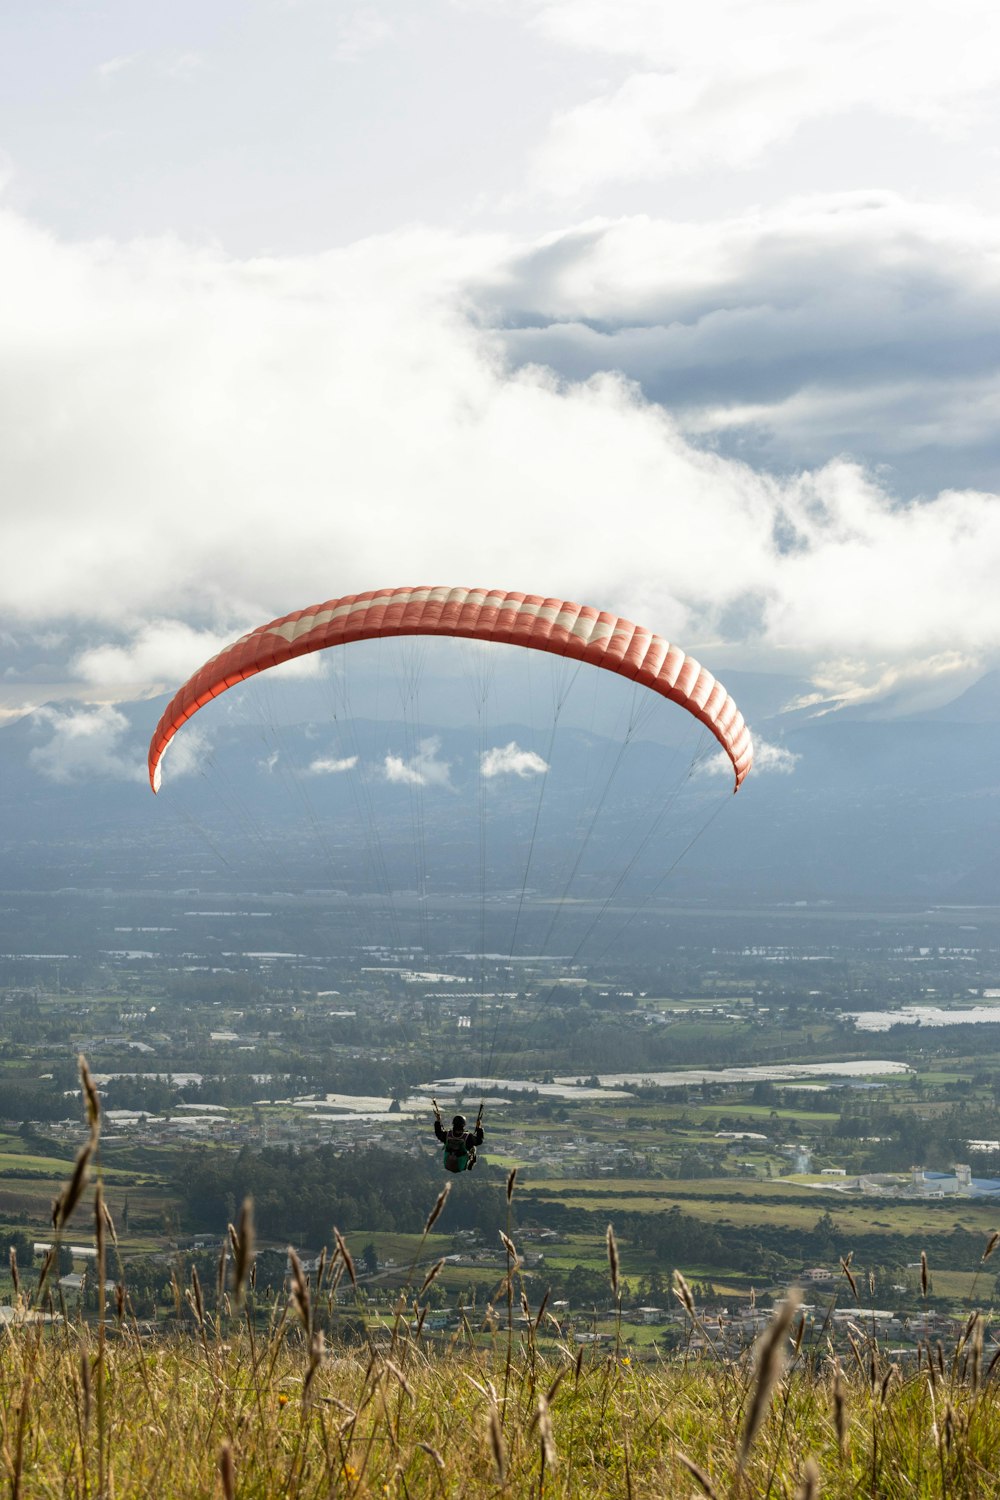 a person paragliding over a lush green field